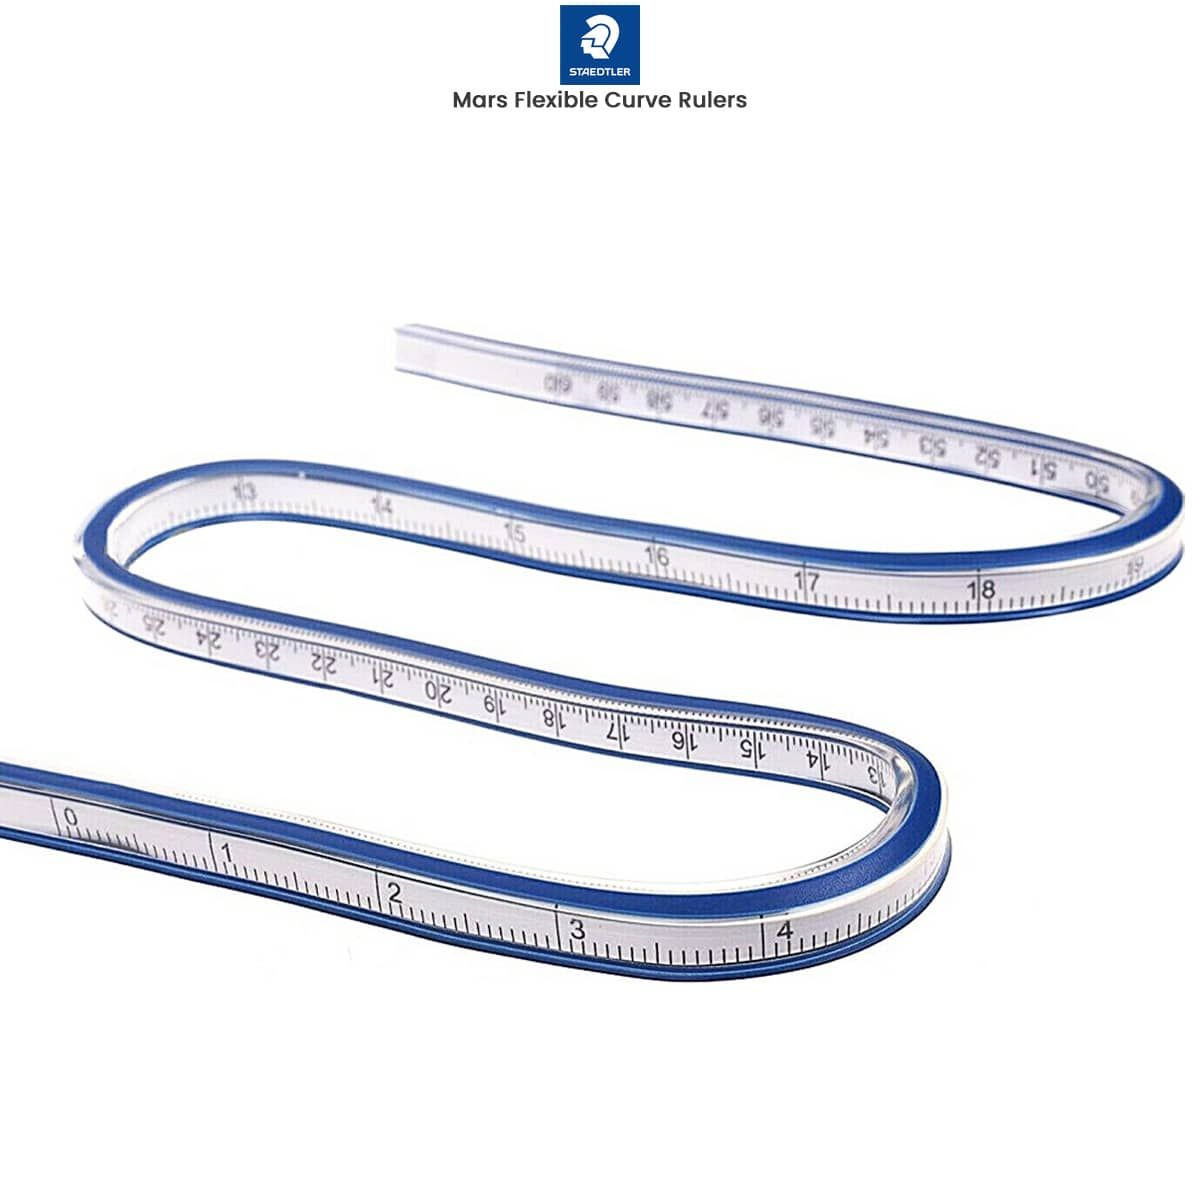 The ruler is very flexible and able to get back to its original shape  (resilient)